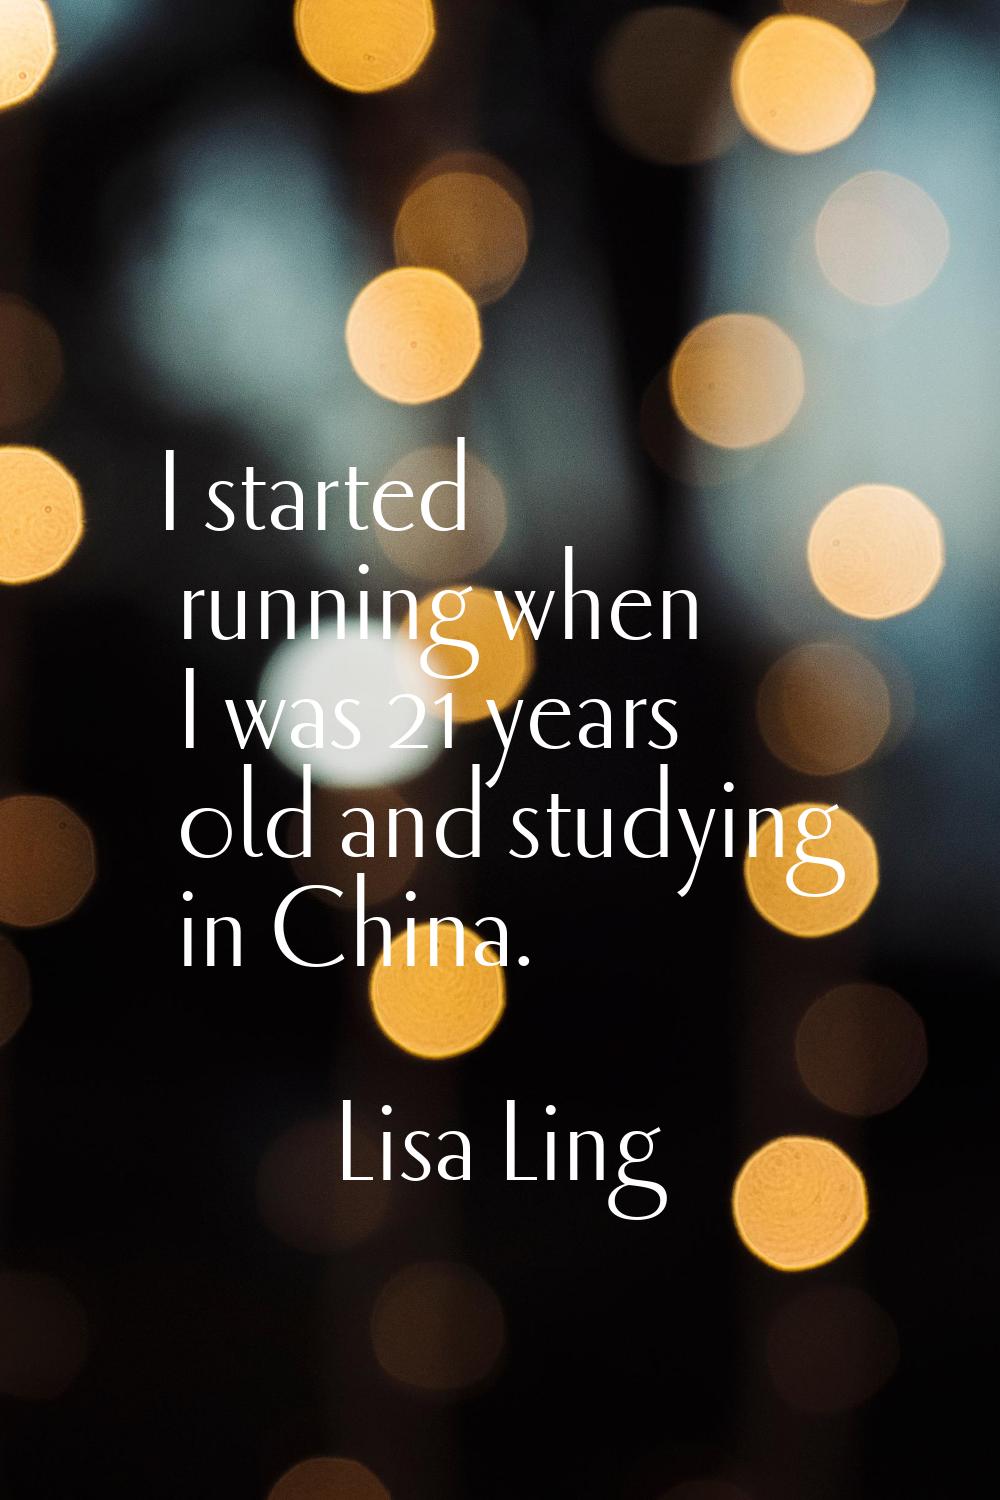 I started running when I was 21 years old and studying in China.